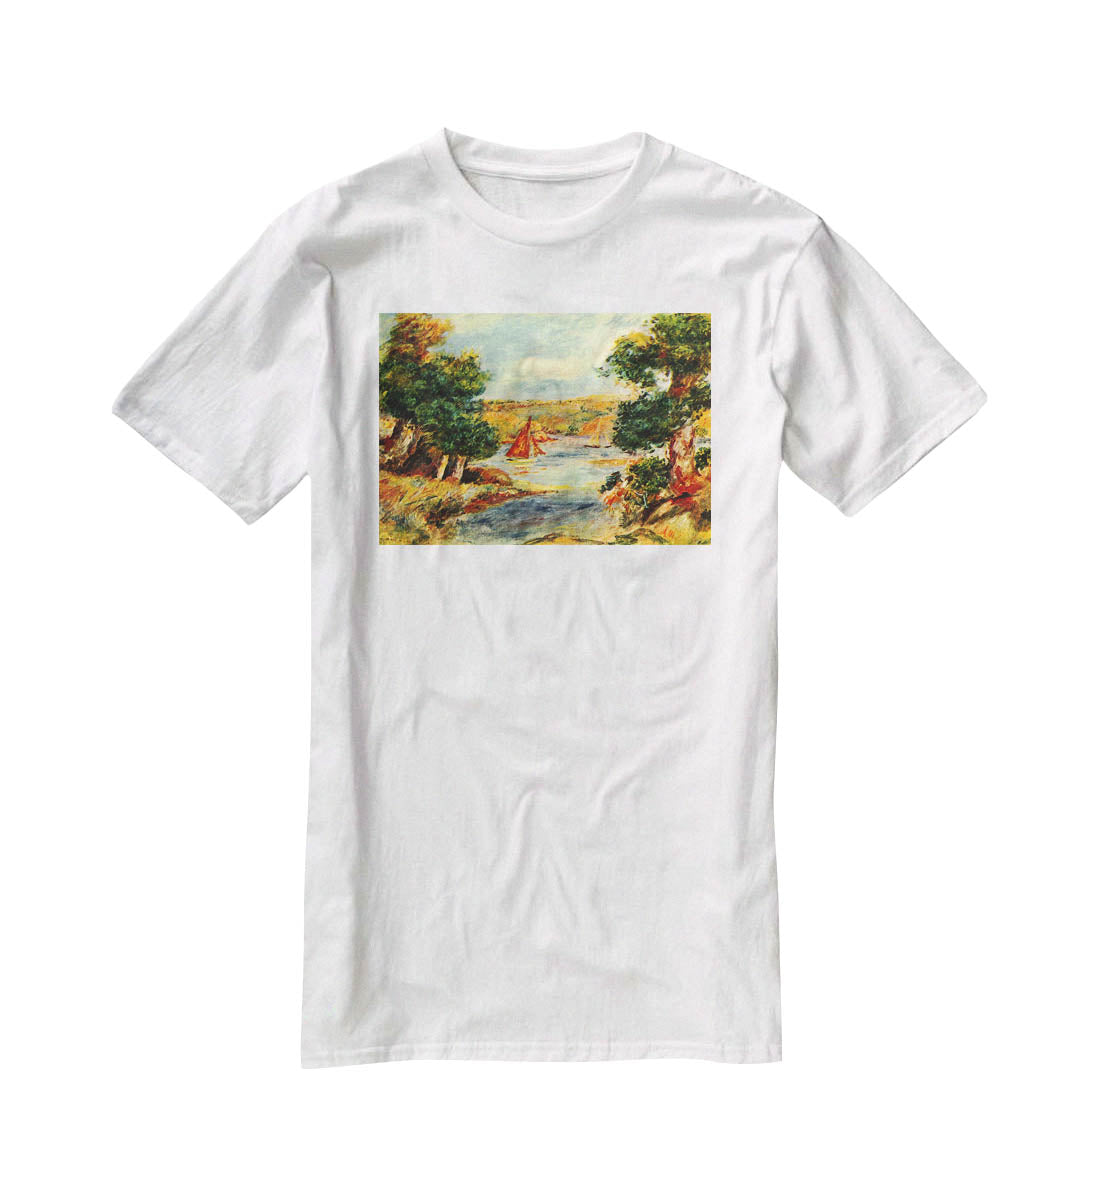 Sailing boats in Cagnes by Renoir T-Shirt - Canvas Art Rocks - 5